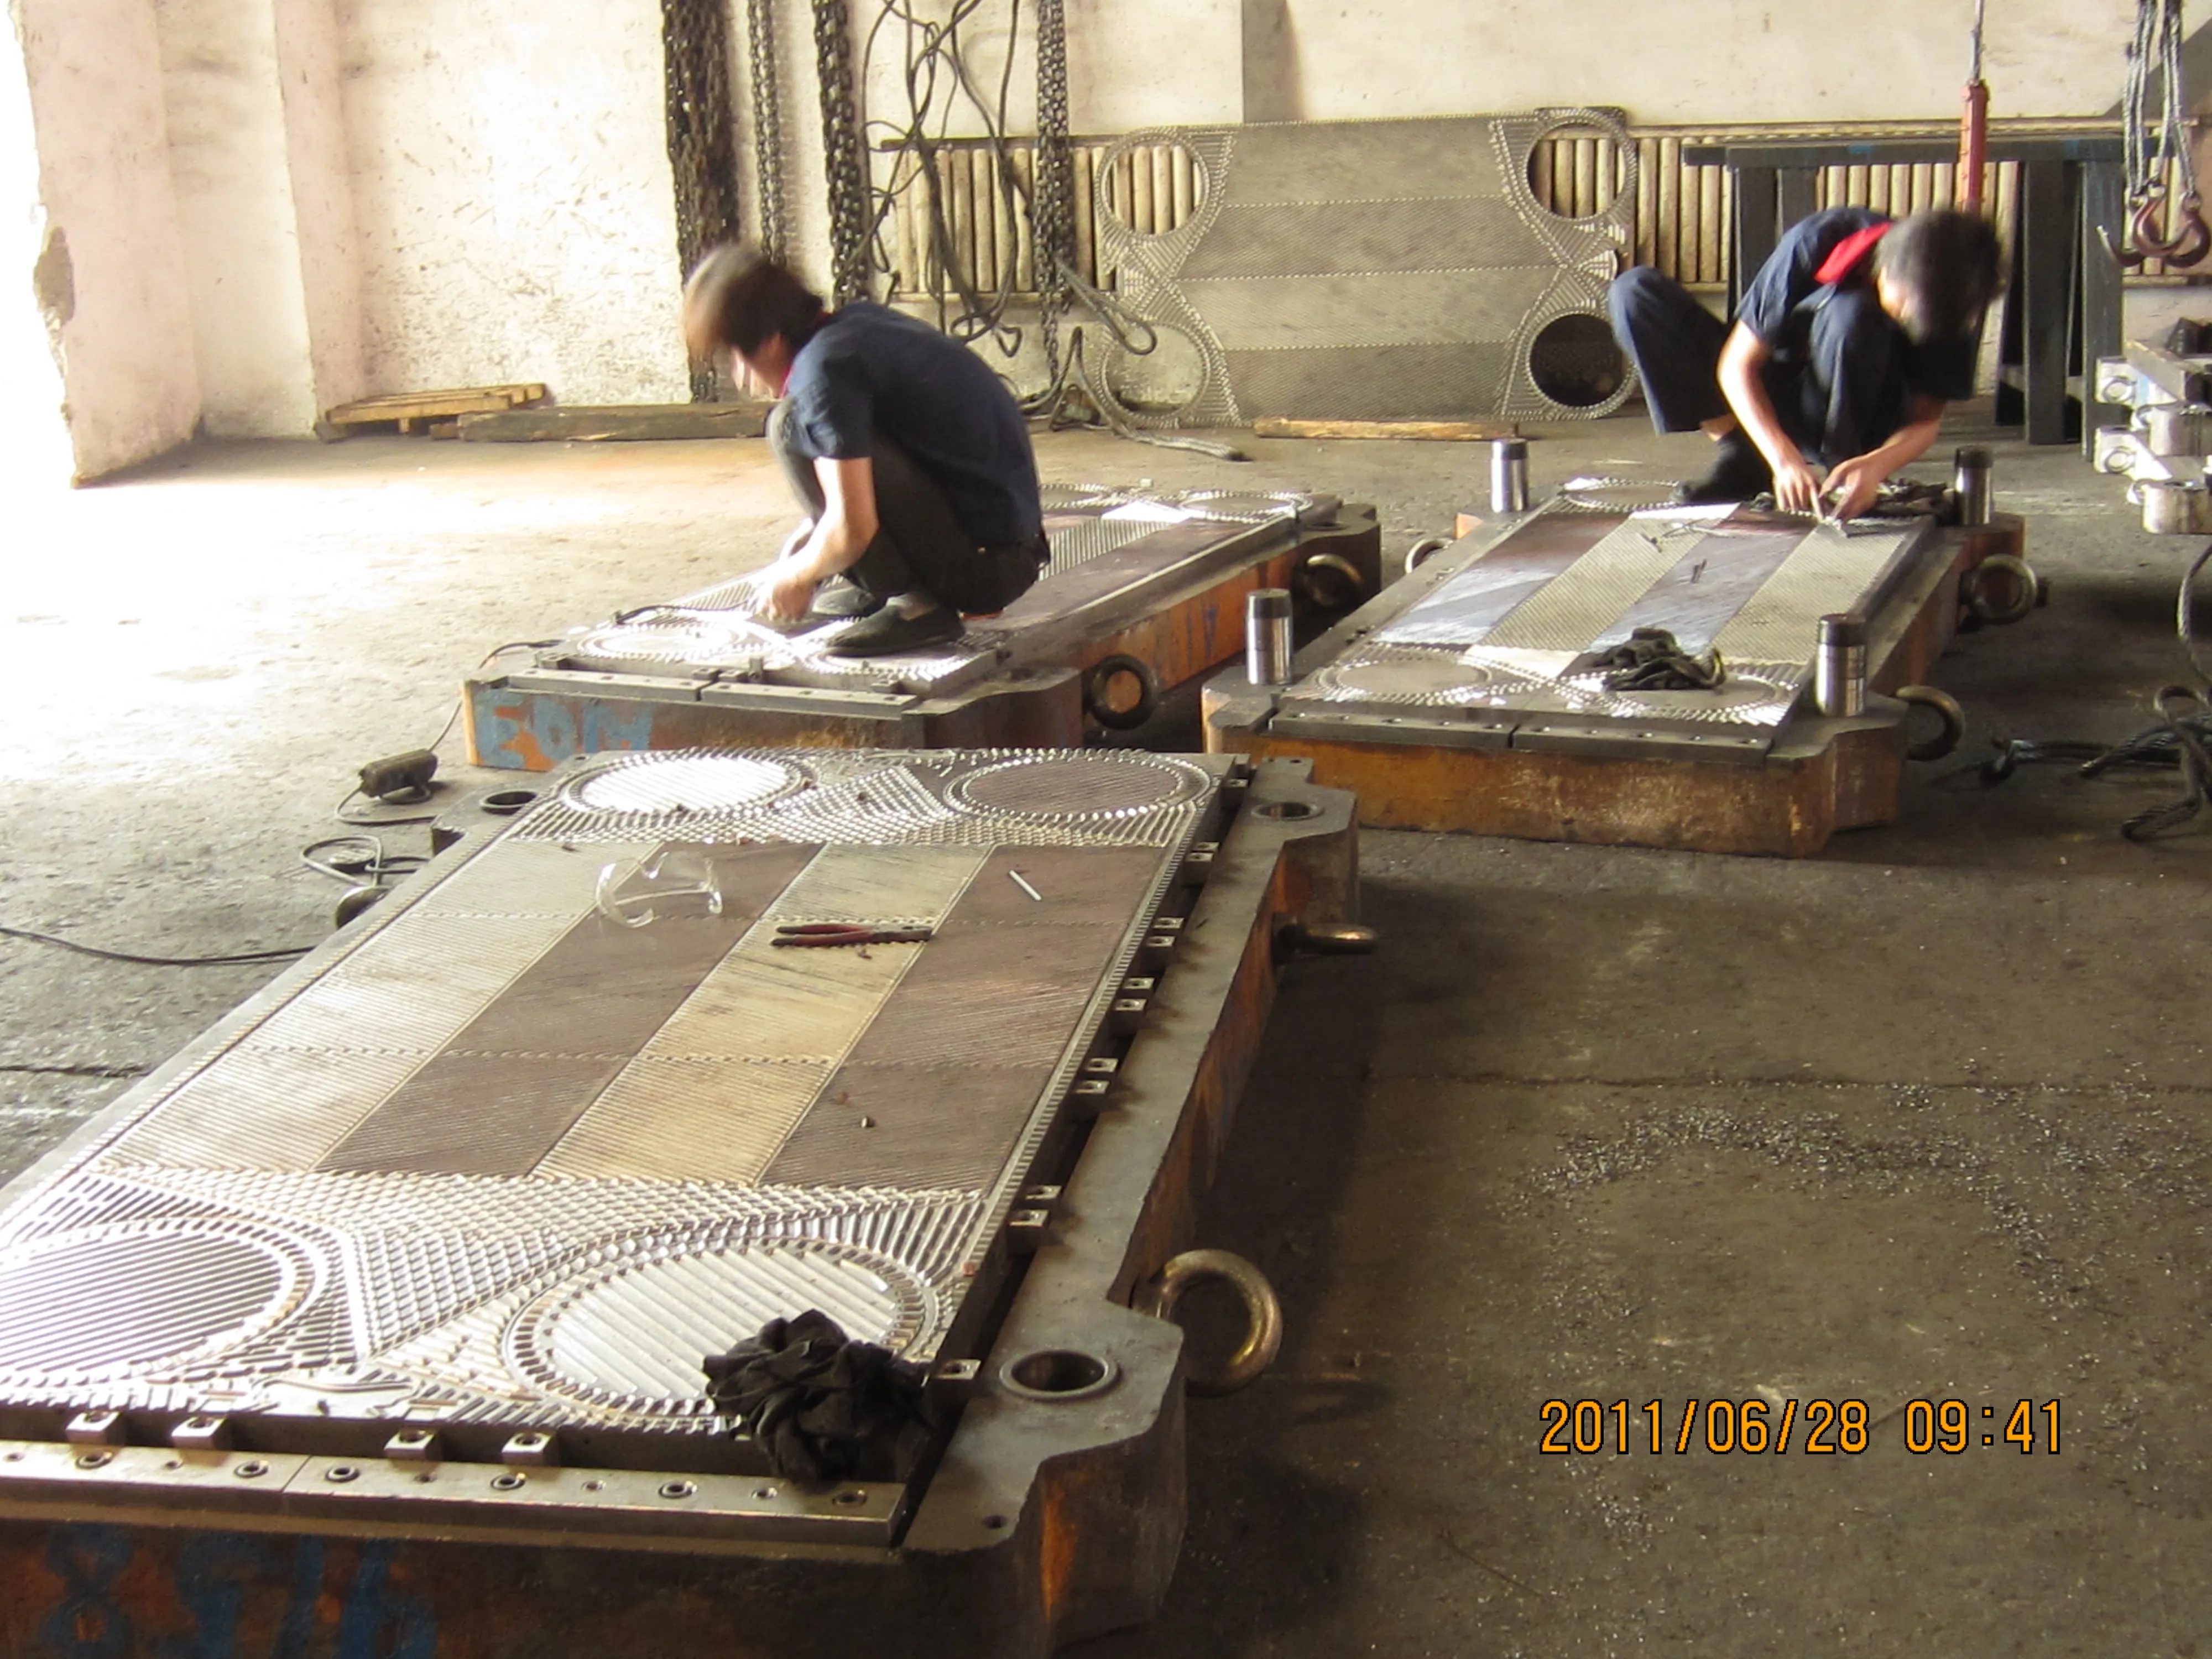 Stainless steel swimming pool S4A, S8A, S14A,S19A,S21 titanium gasket plate heat exchanger plate mould supplier